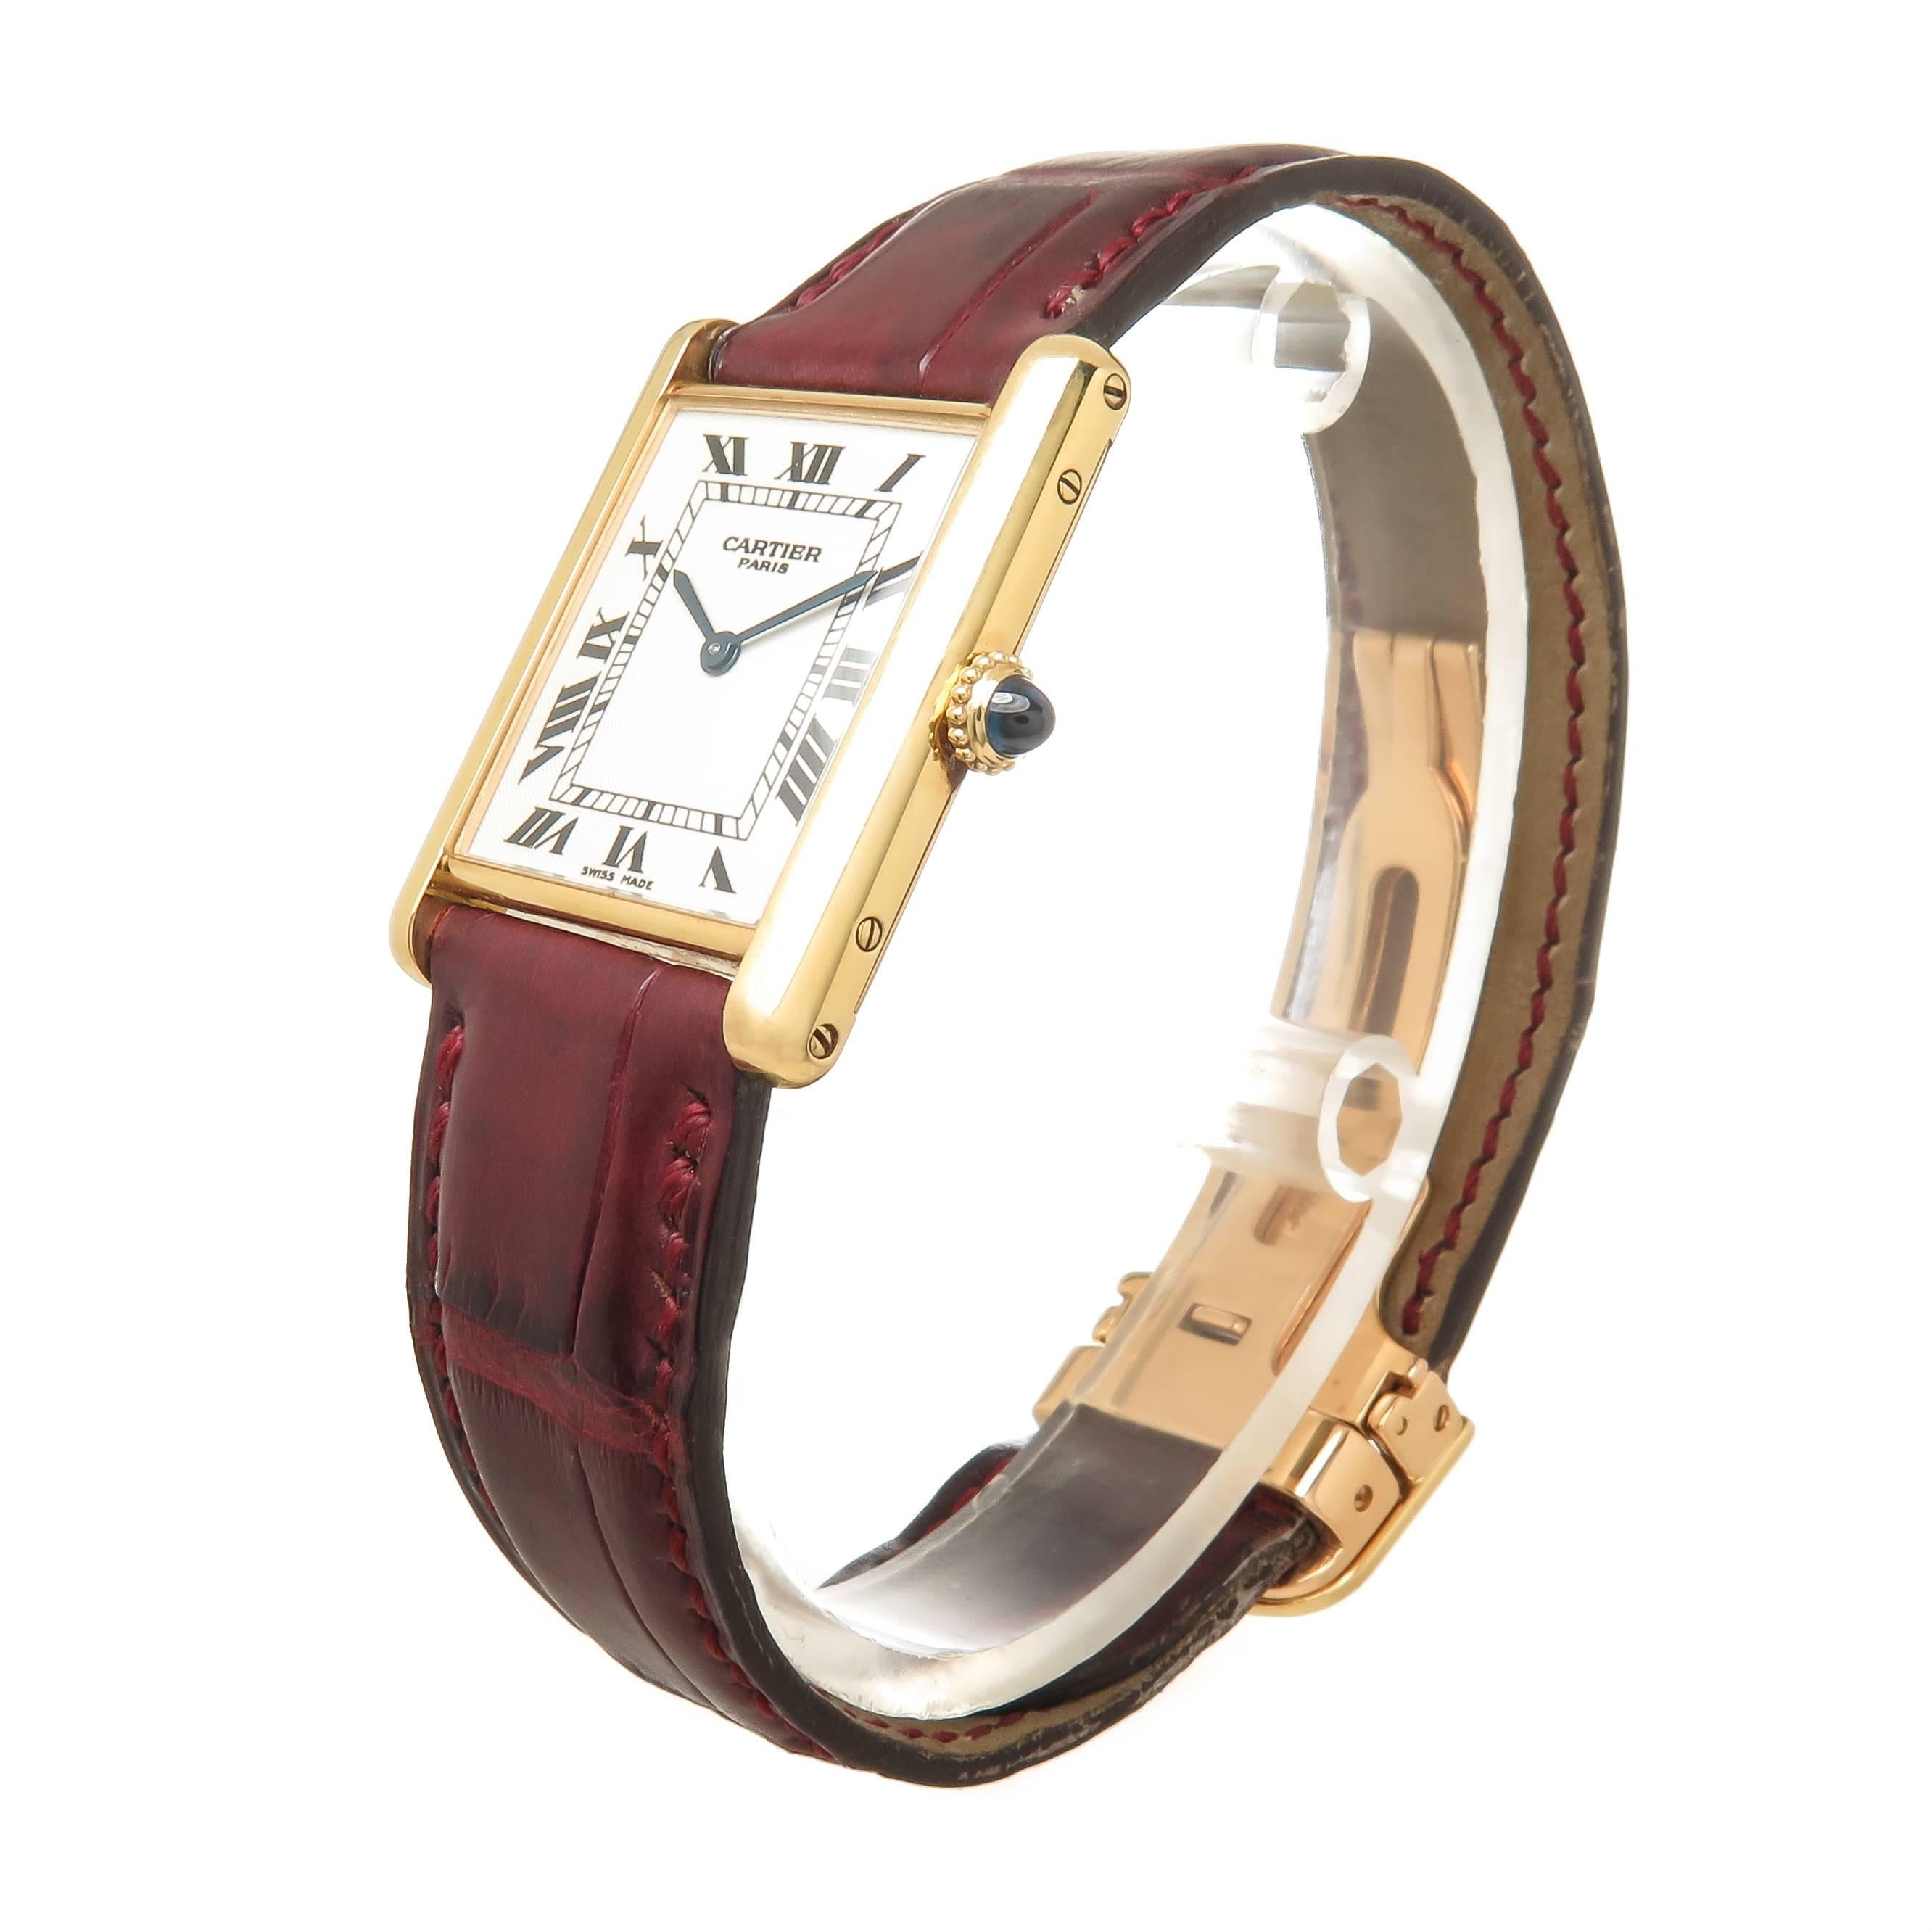 Circa 2000 Cartier Tank Wrist watch, 30 X 24 MM 18K Yellow Gold Case, Mechanical, Manual Wind movement, Engine Turned White Dial with Black Roman Numerals. 17.5 MM Cartier Burgundy Textured Grain adjustable Strap with 18K yellow Gold Cartier